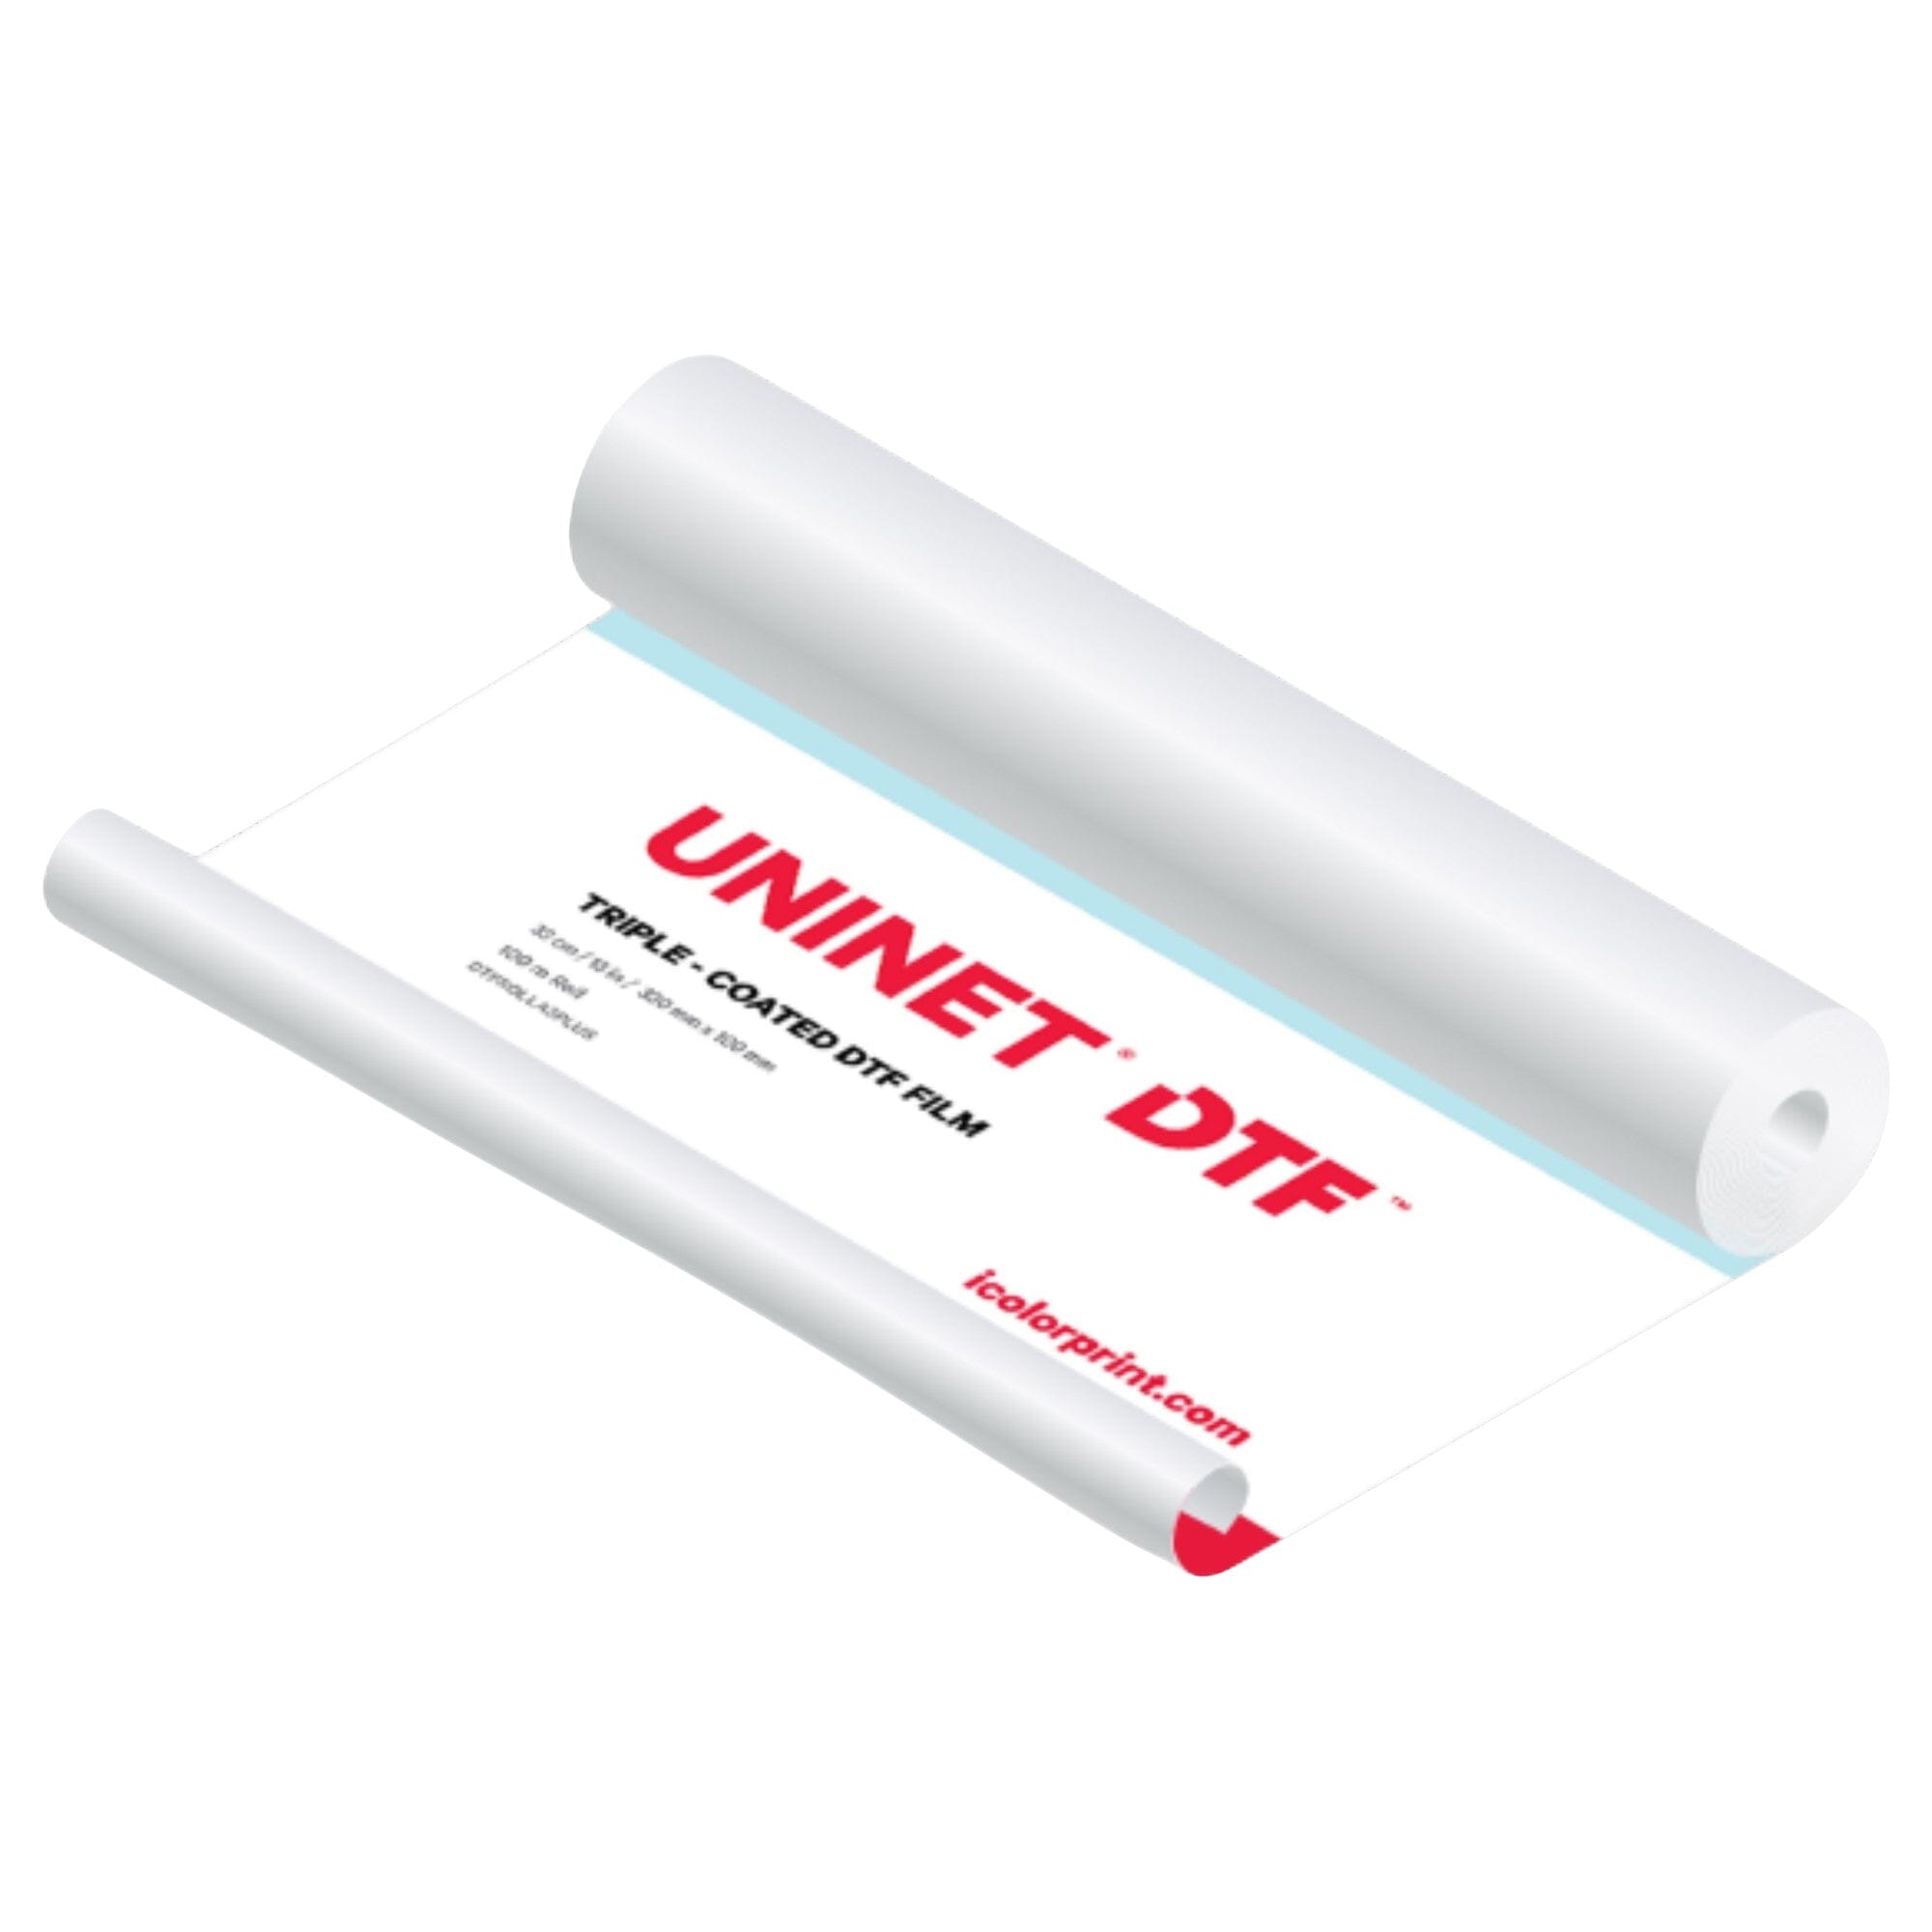 Yamation DTF Transfer Film Roll: 13inch 328 ft Premium Double-Sided Matte Finish Pet Transfer Paper Direct to Film